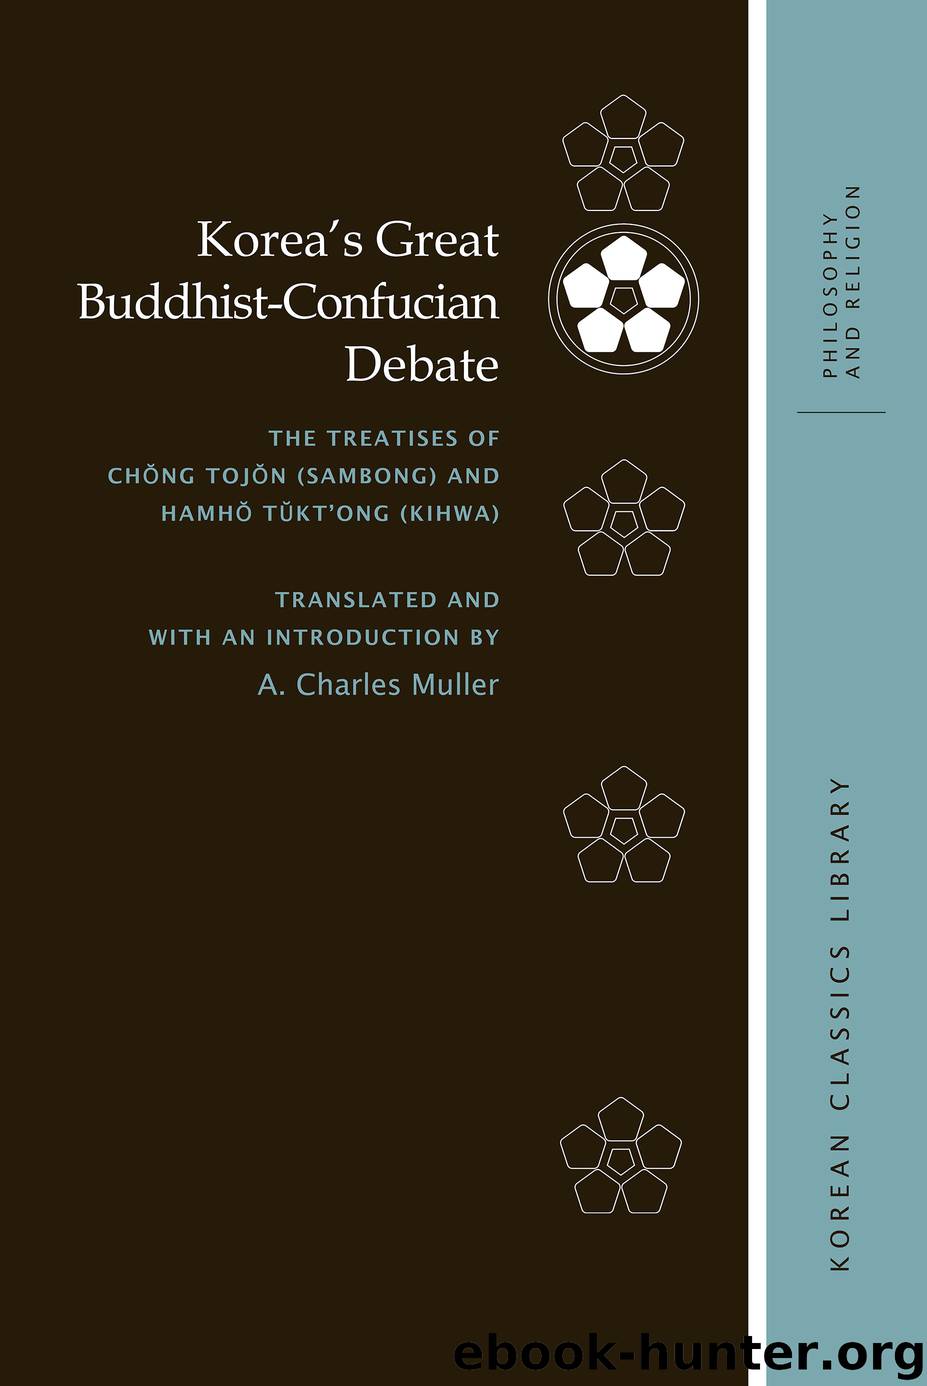 Korea's Great Buddhist-Confucian Debate by A. Charles Muller